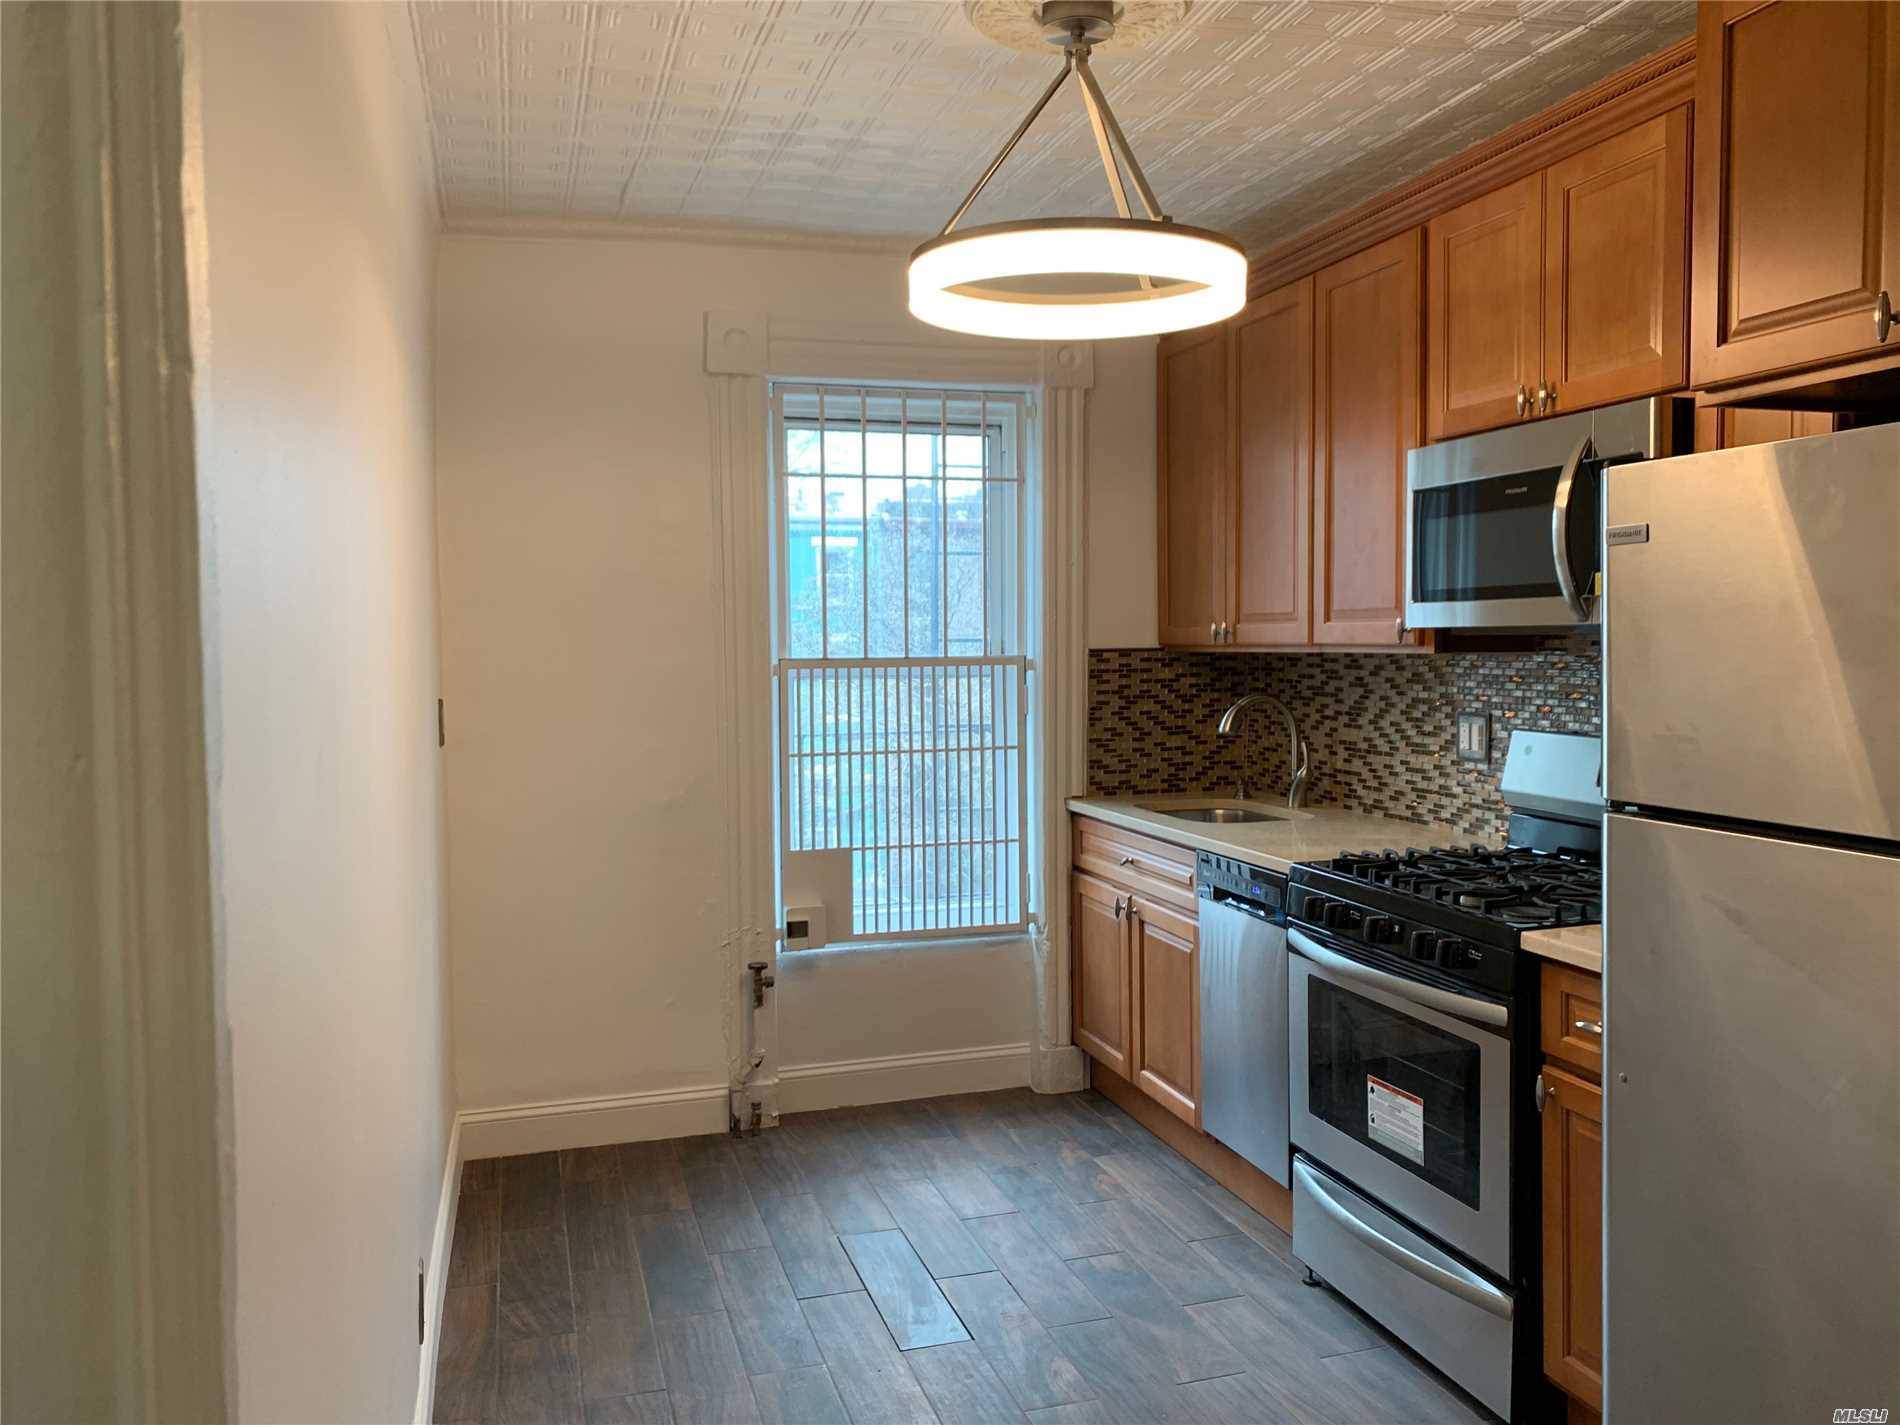 This Spacious 3 Bedroom Is The Entire Floor Of A Well-Maintained Brownstone.